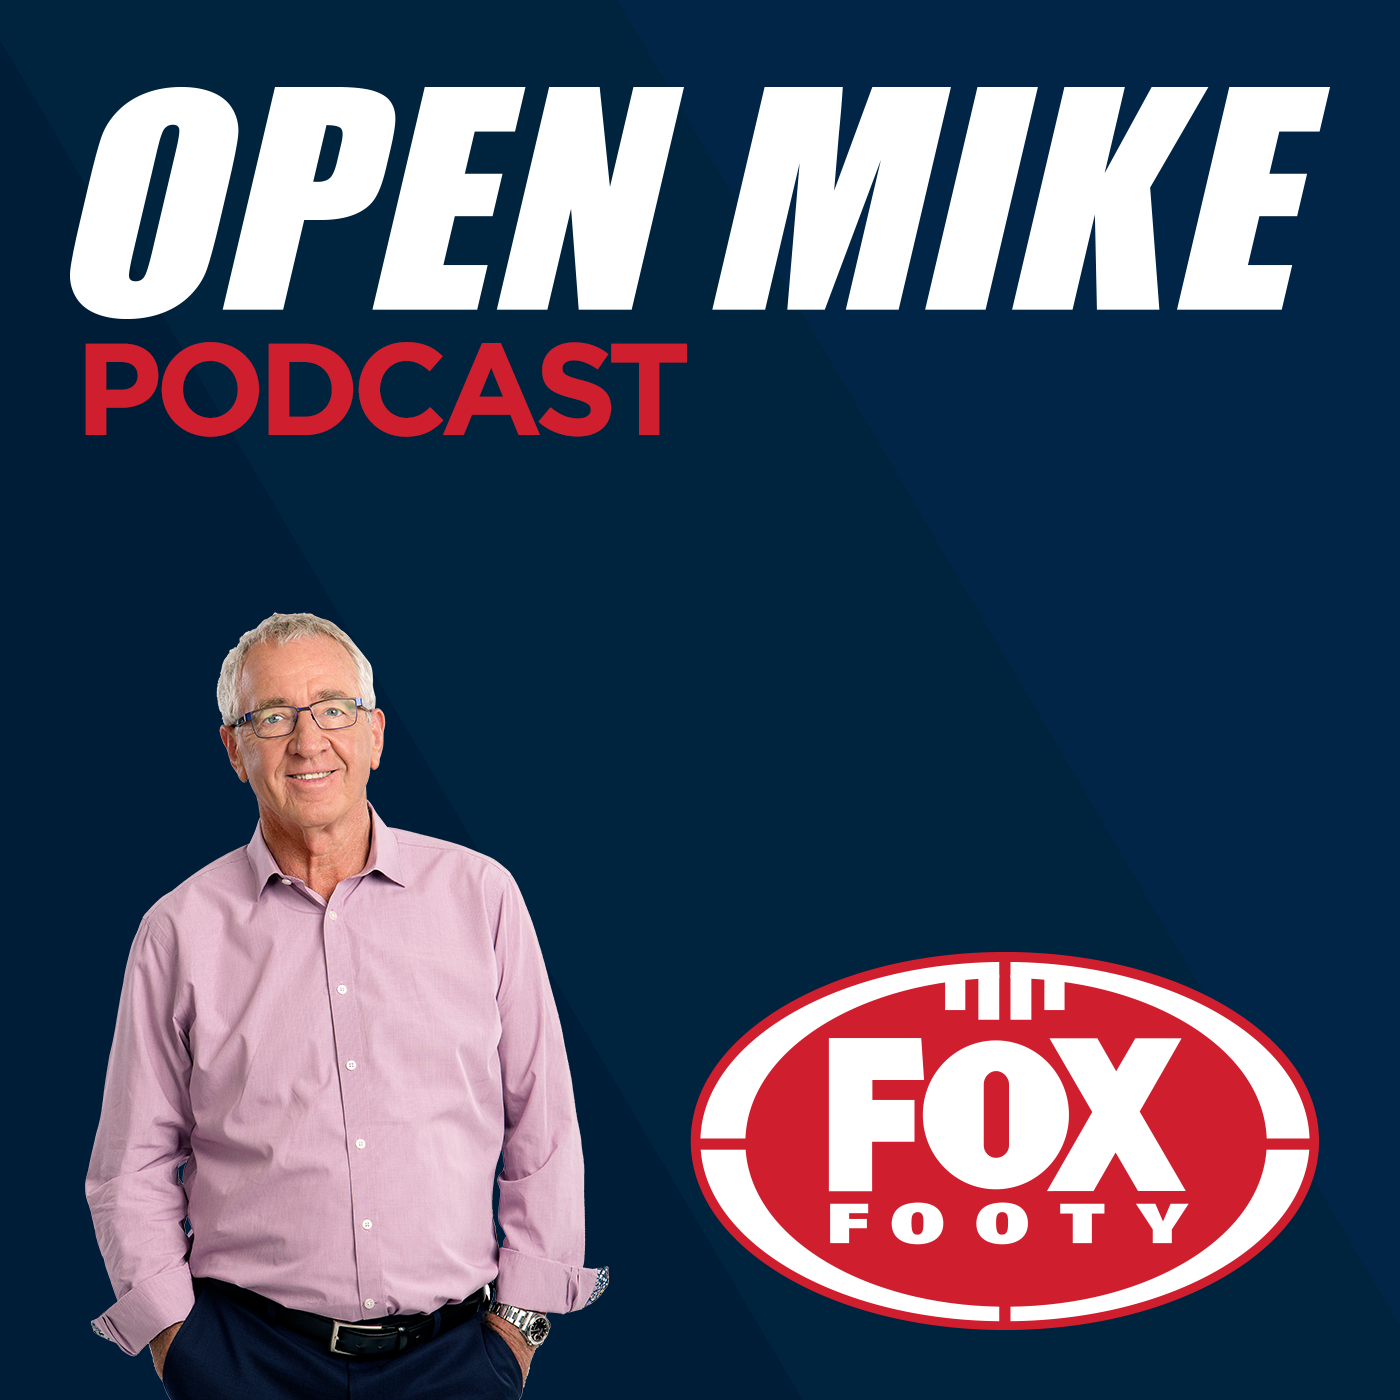 FOX FOOTY Open Mike: 3 May, 2016 - DENIS BANKS